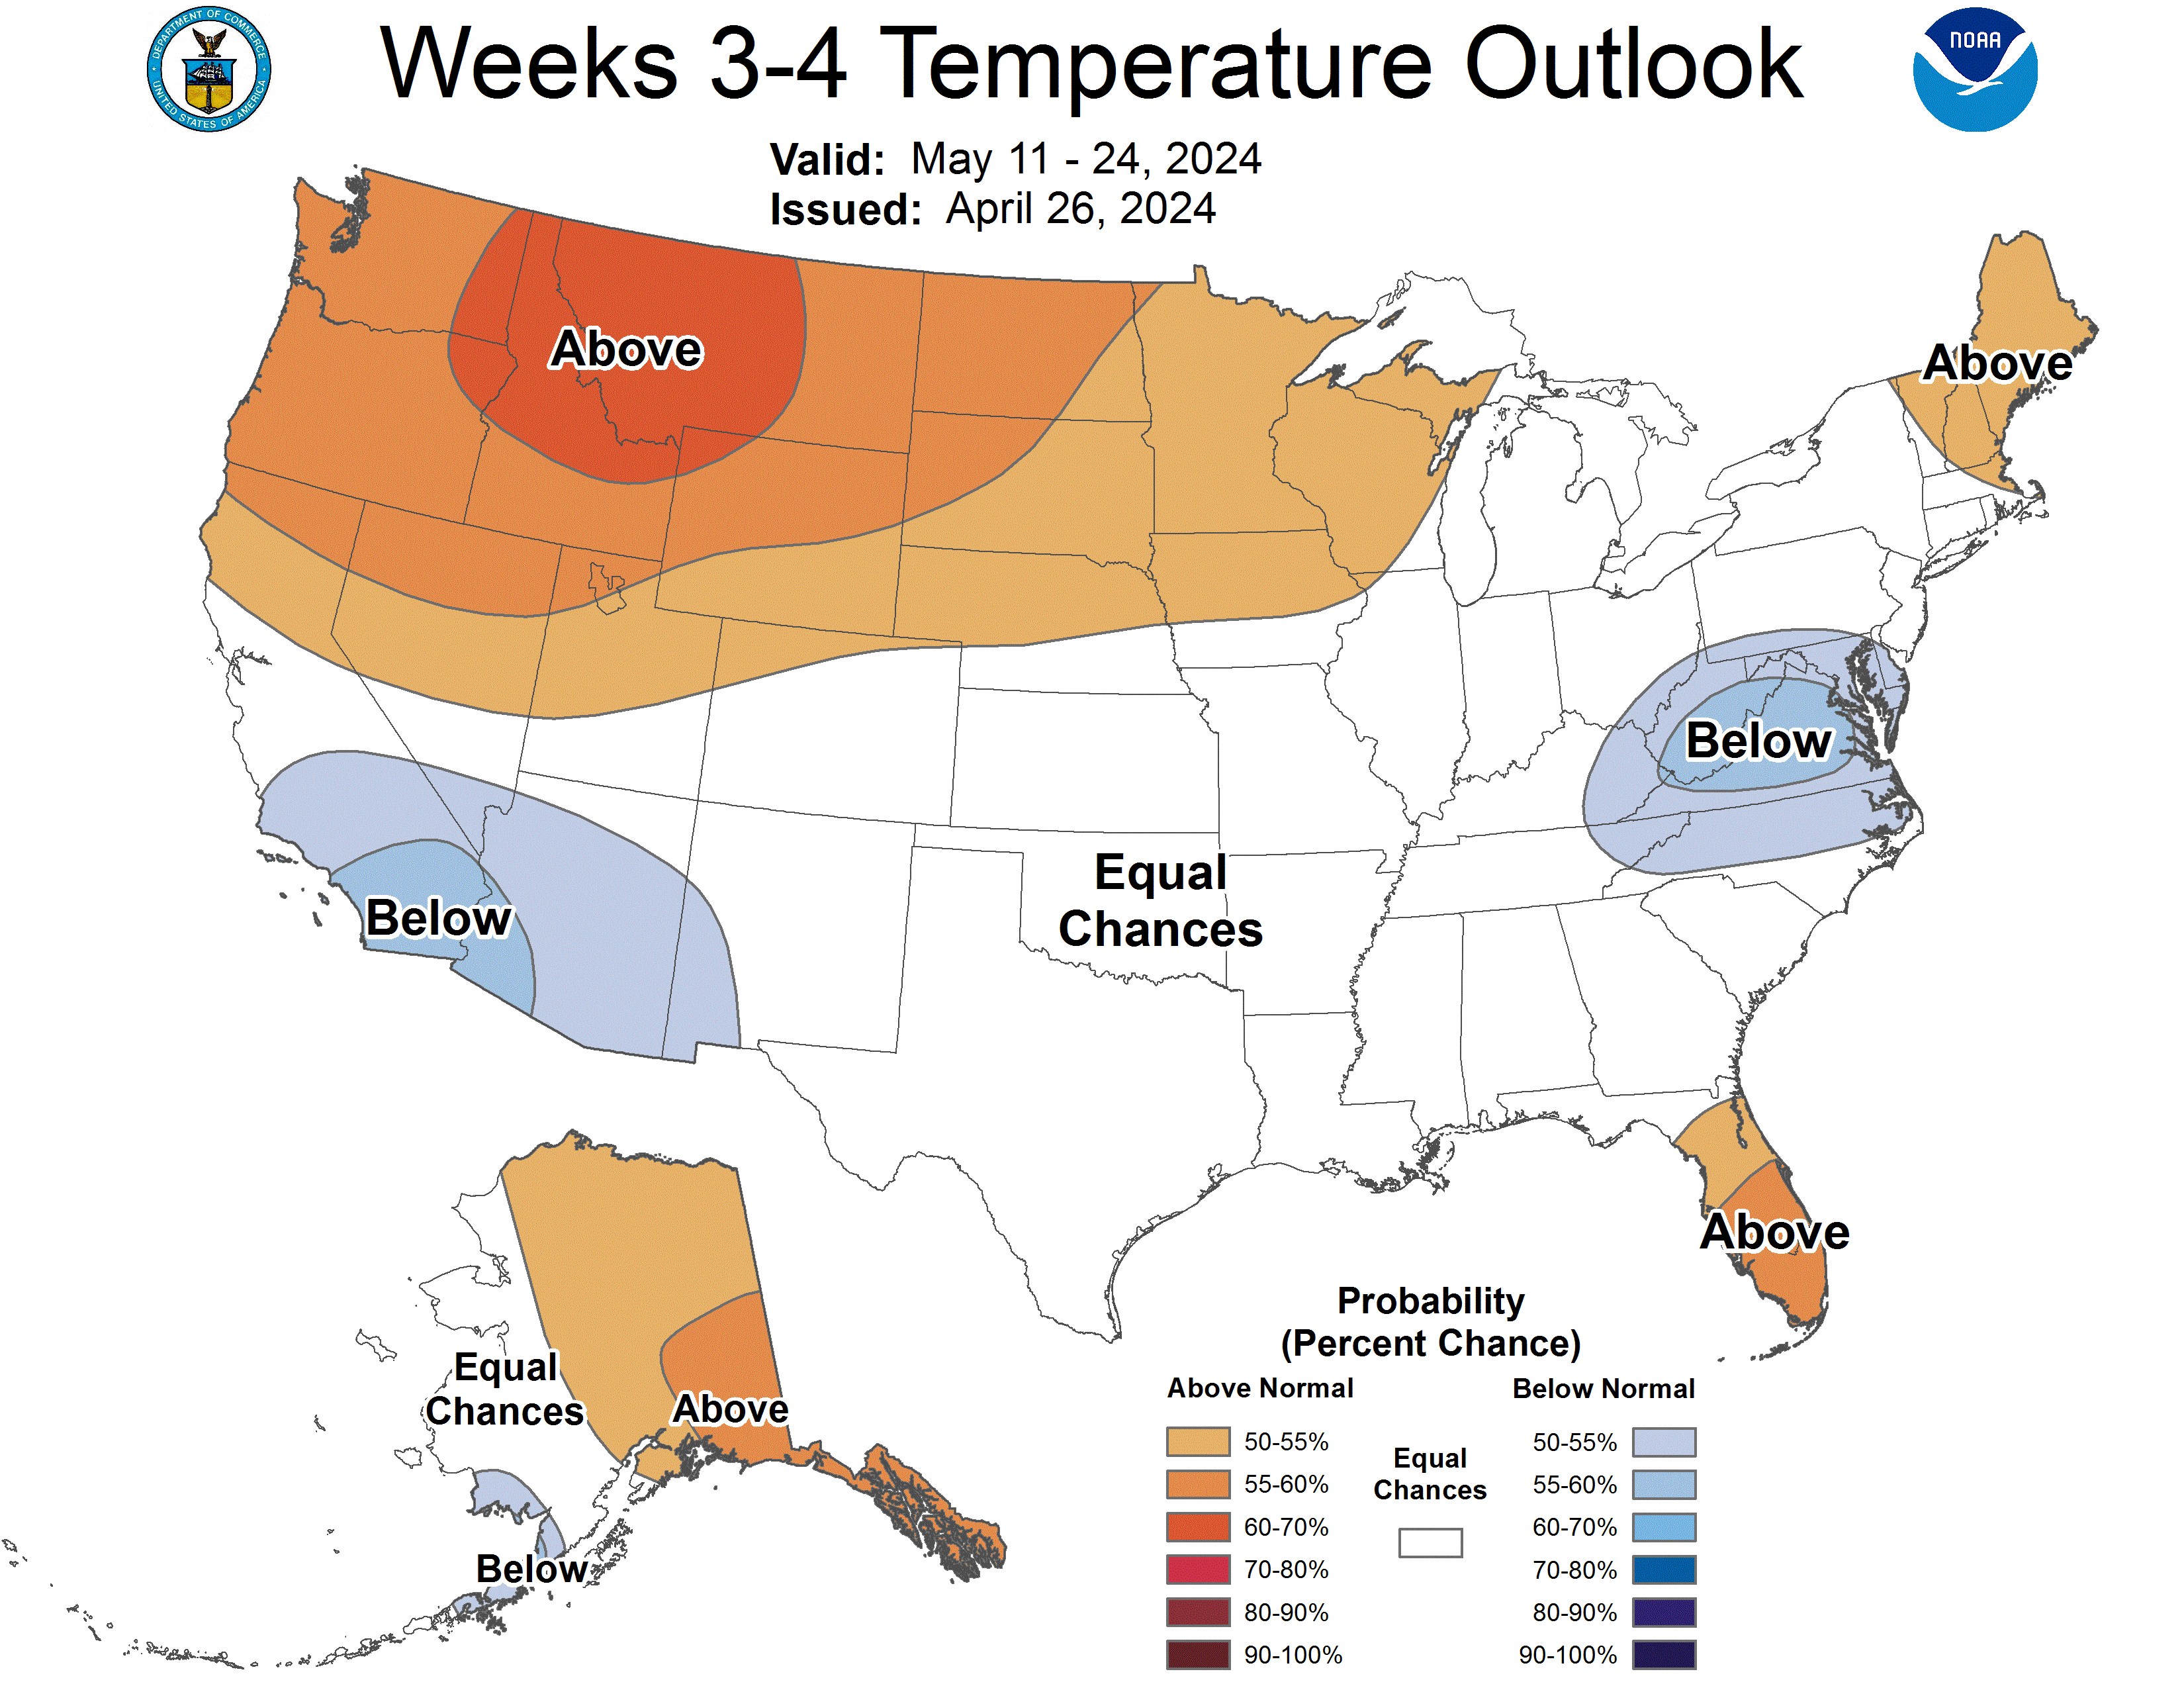 Week 3-4 Outlooks - Temperature Probability